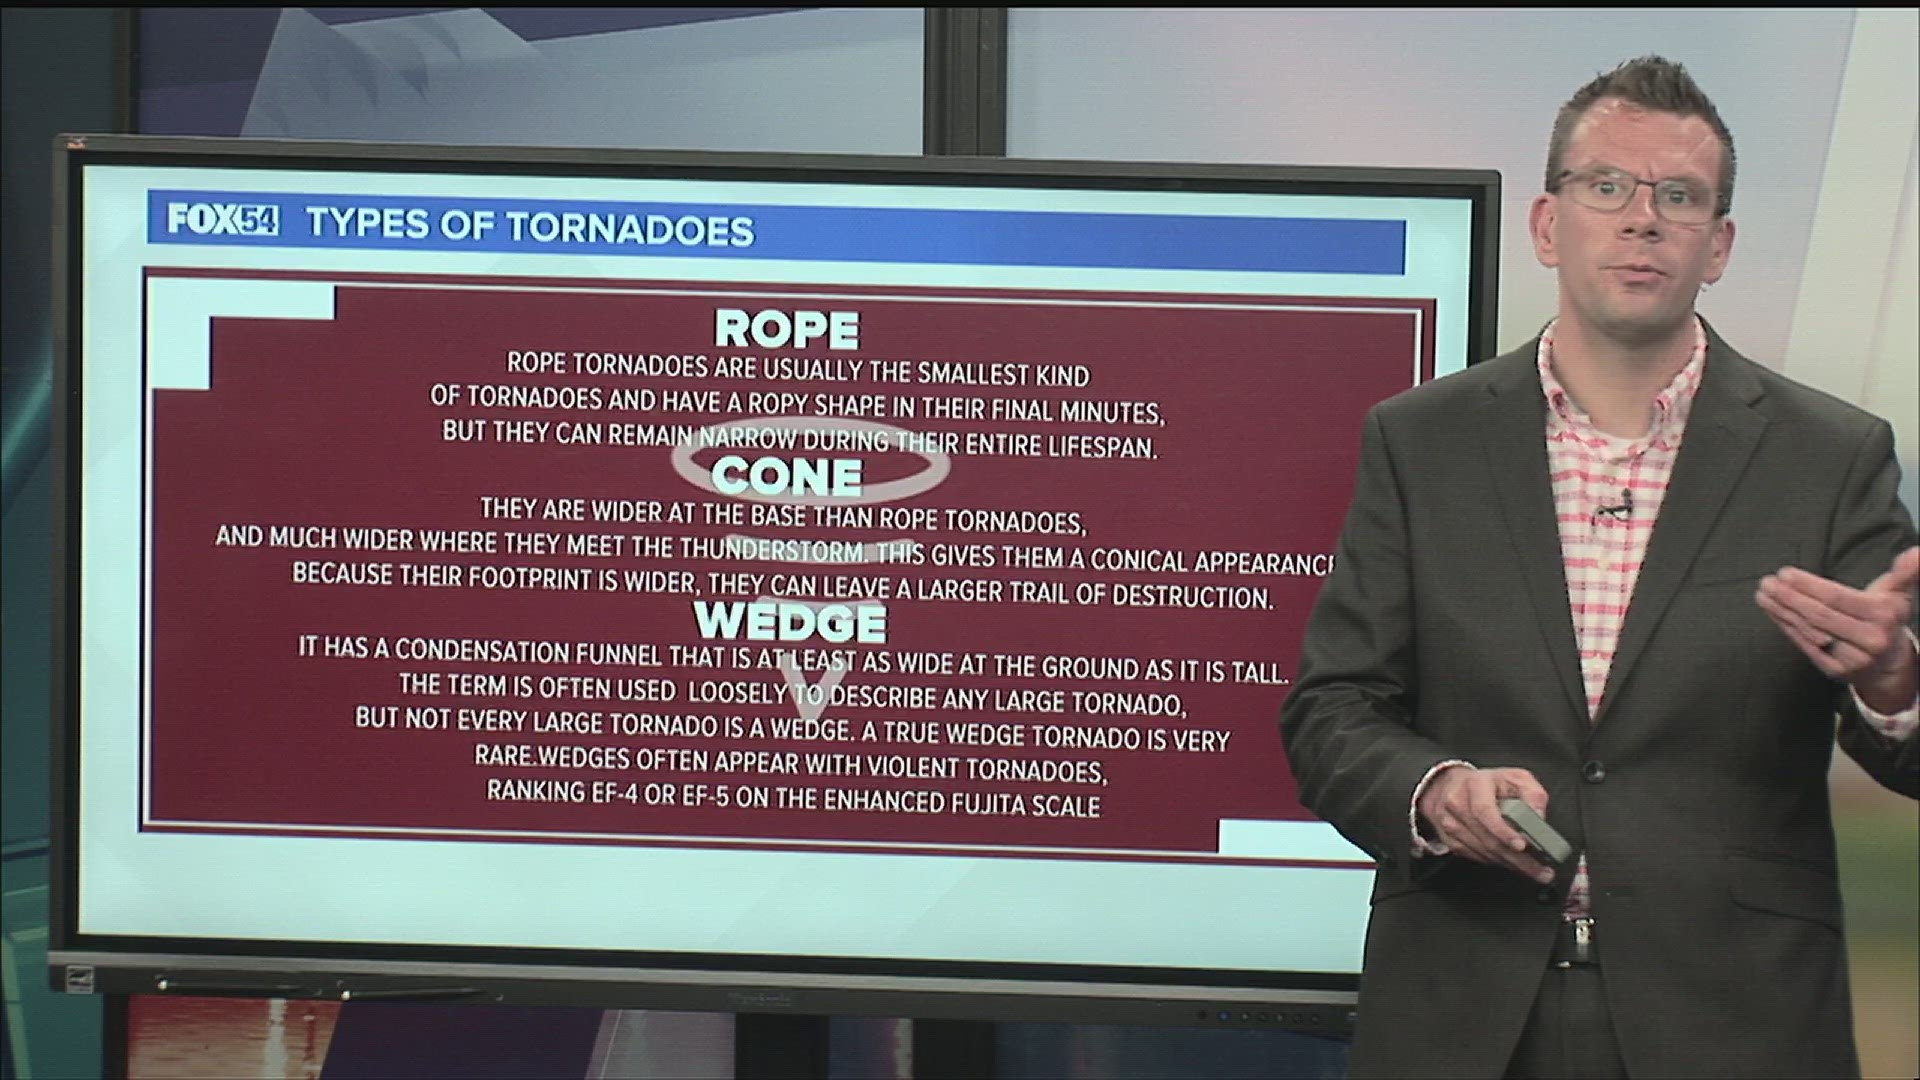 Storm spotters reported the Mississippi tornado was at least a mile wide. Alabama's twisters from the same system were much smaller. Jordan Dressman examines why.